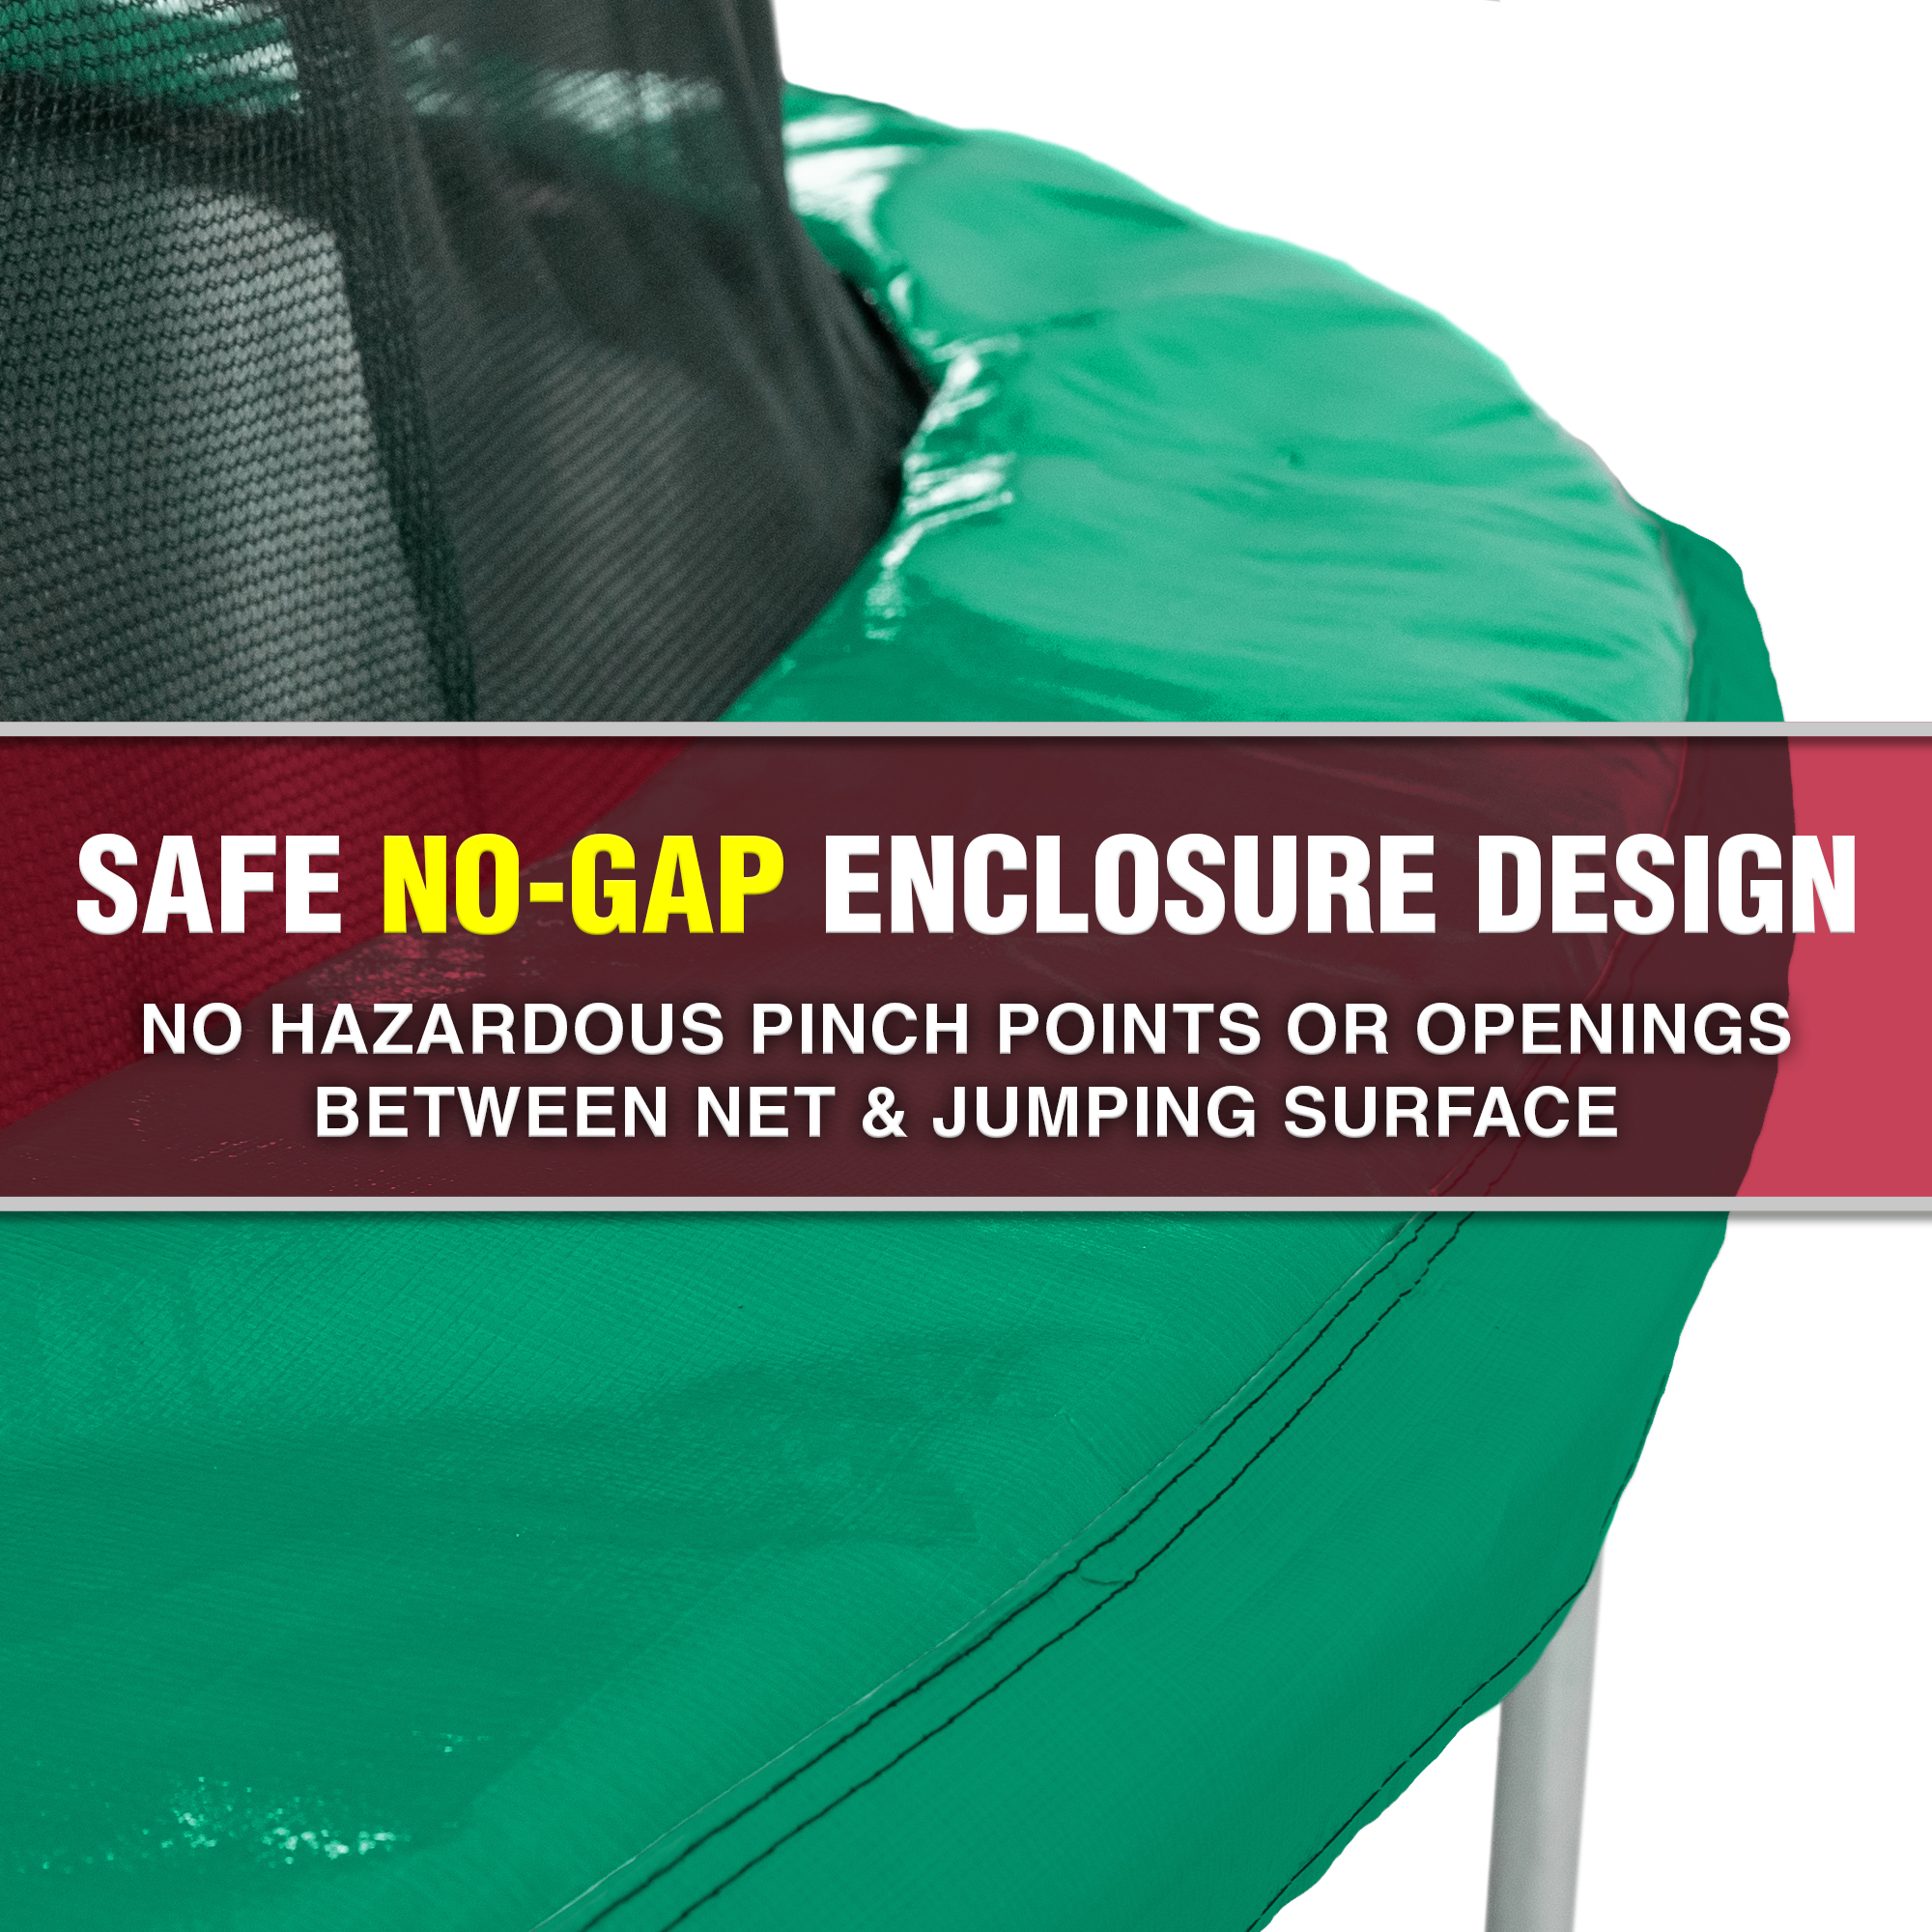 TruJump 12' Trampoline with Safety Enclosure & Jump Mat with Lifetime Warranty (Green) - image 6 of 9